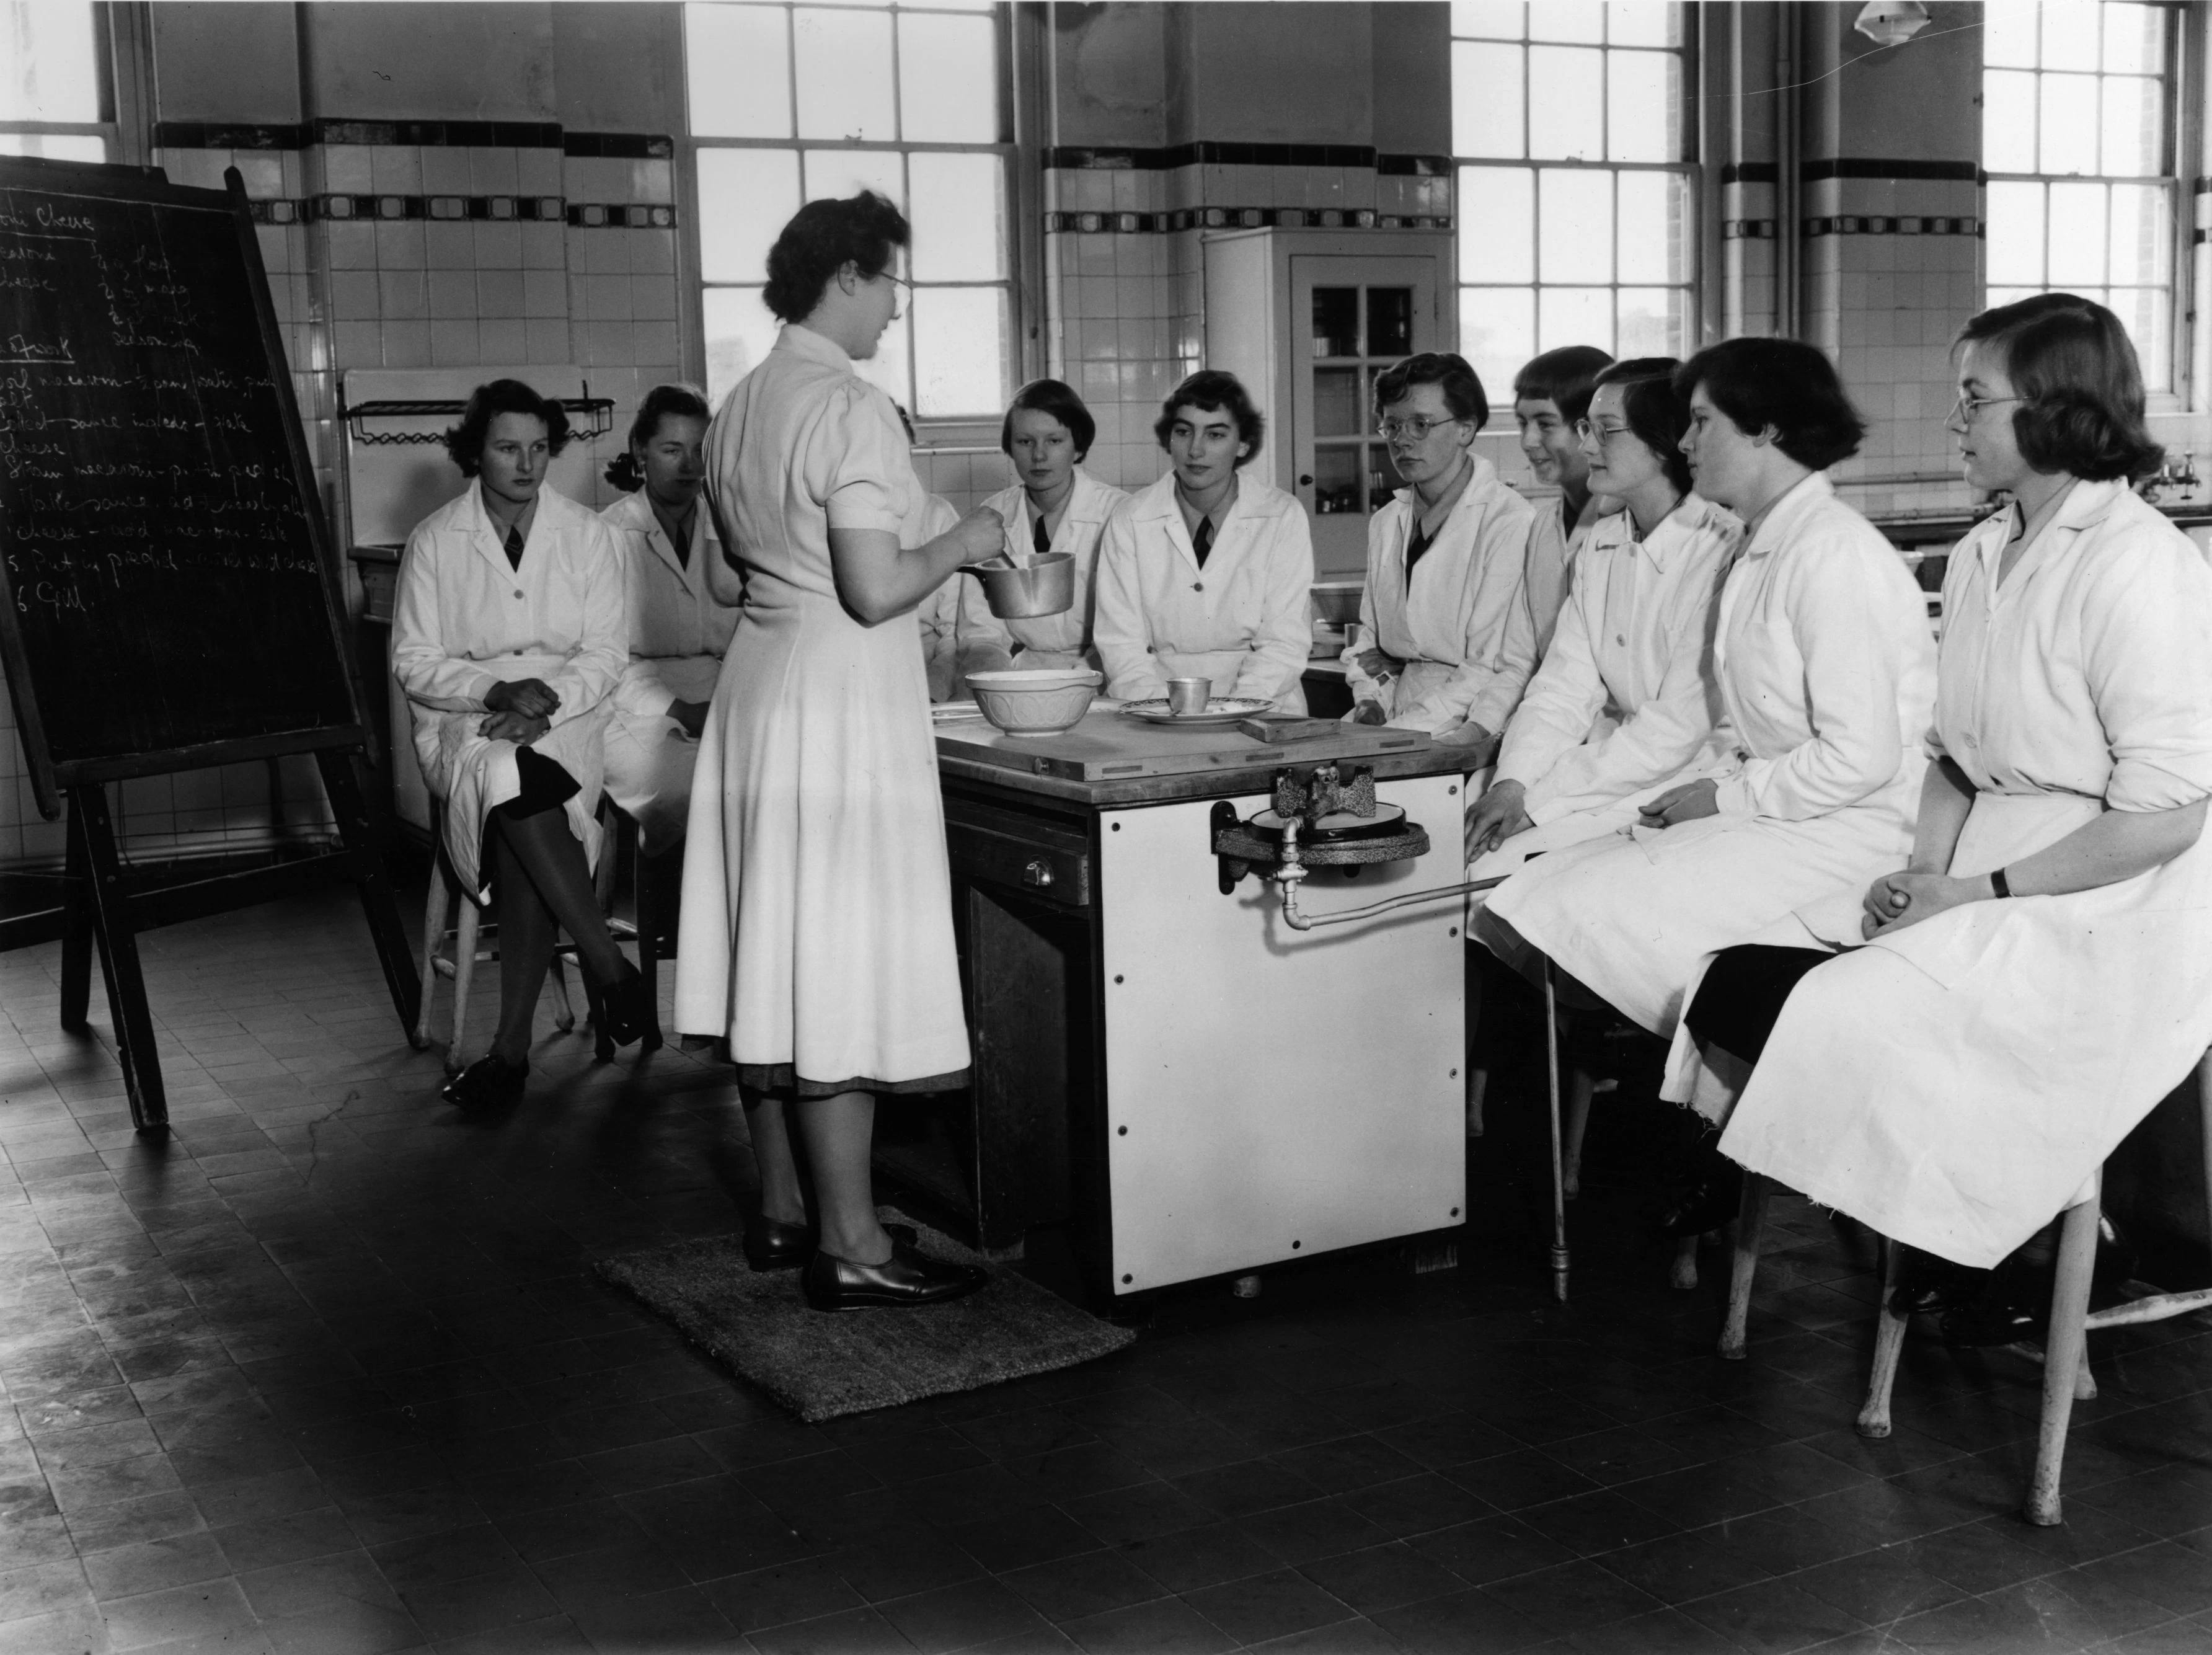 3rd March 1953: Girls in the lower fifth form of the girl's School at Christ's Hospital, Hertford, are given a home economics lesson. Getty Images/Harrison/Stringer